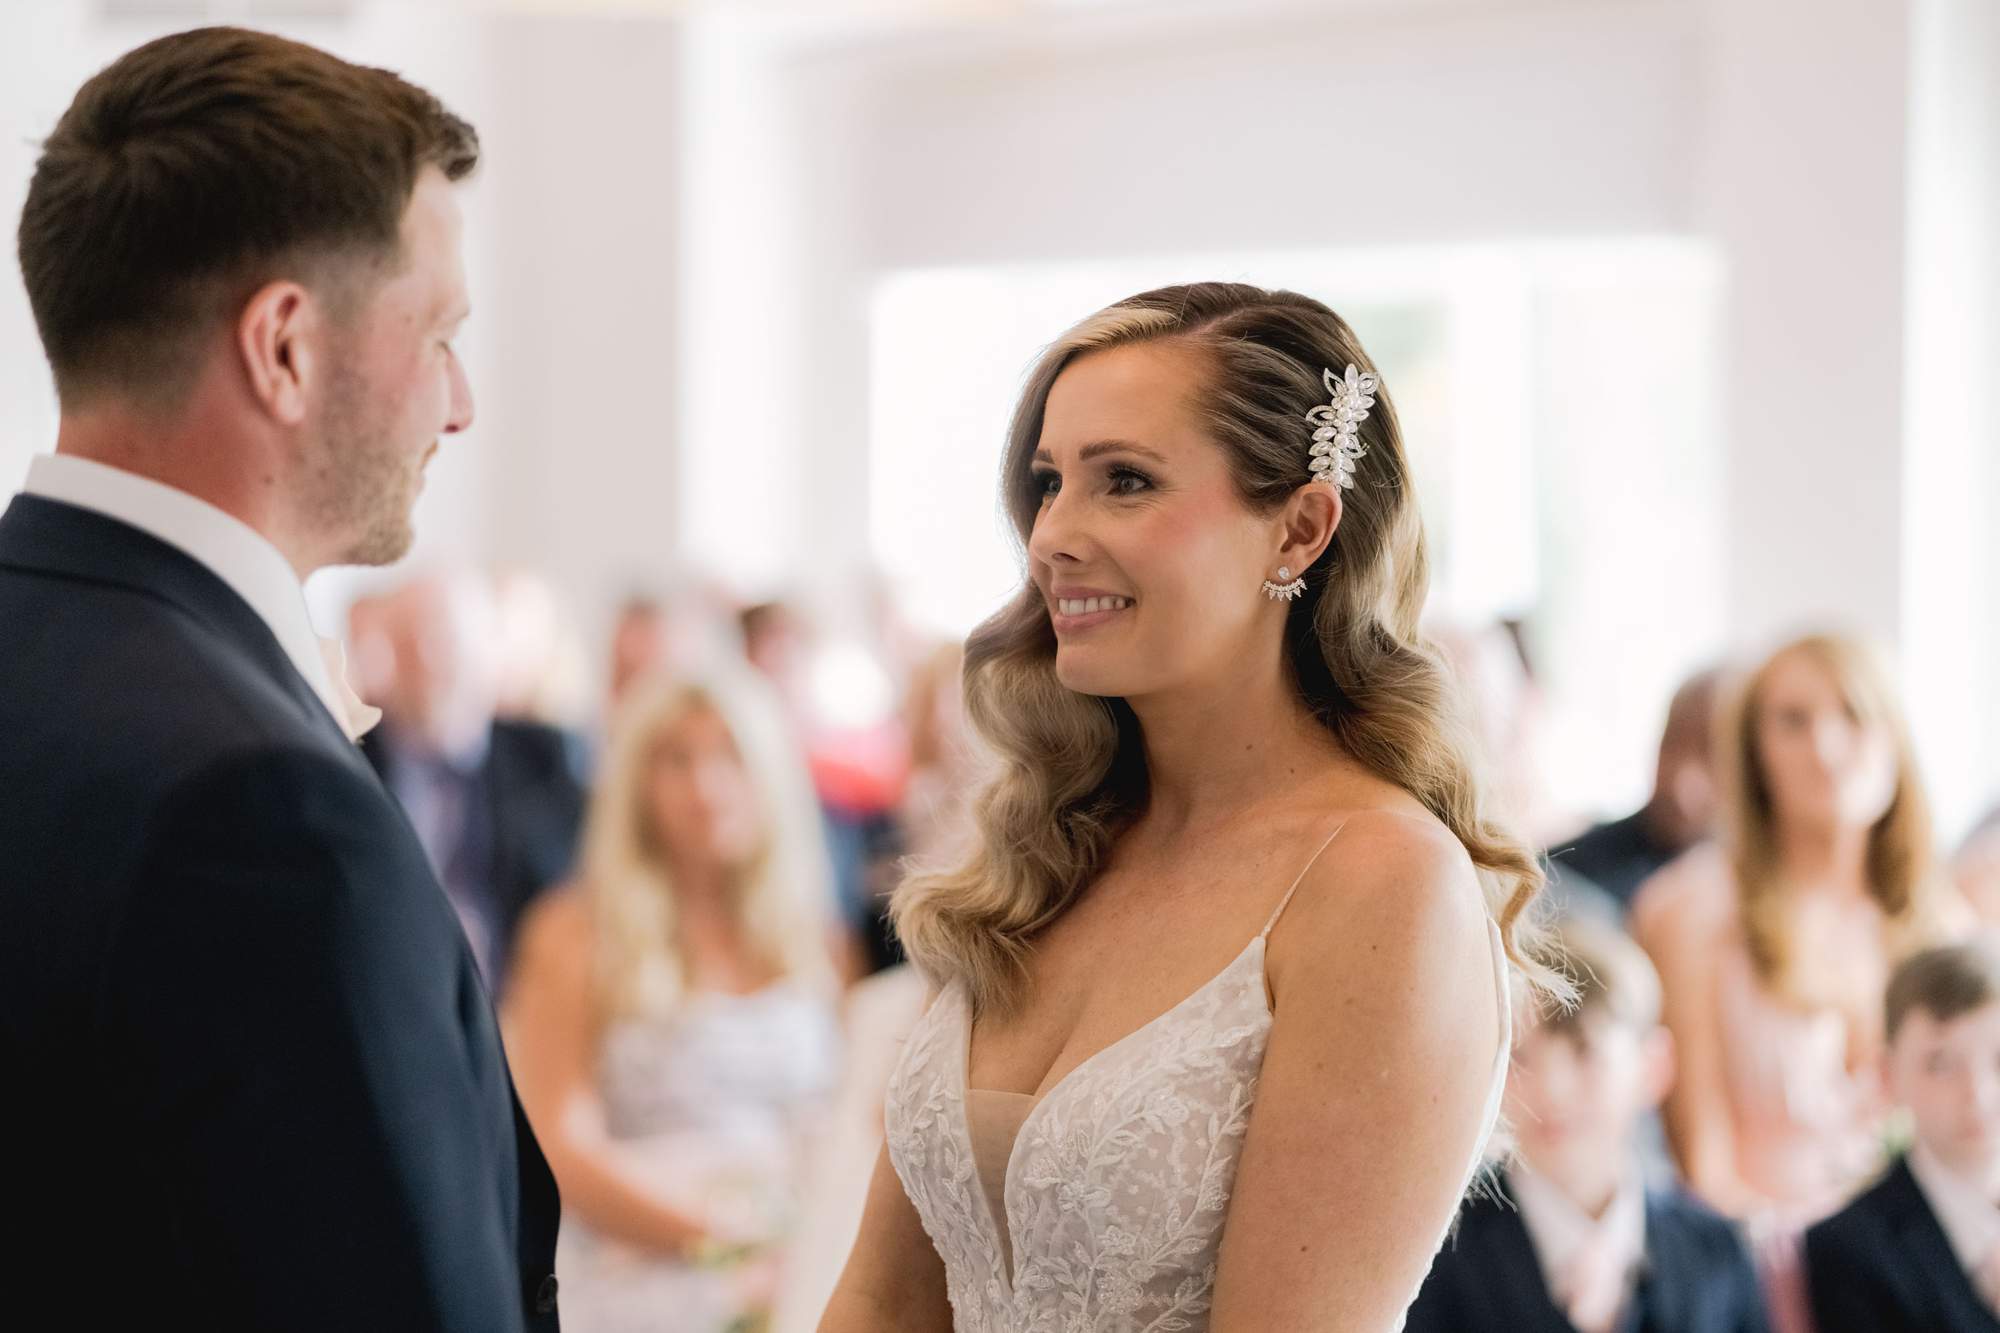 Bride and groom smiling at each other during their wedding ceremony at Cottesmore Golf Club in Sussex.